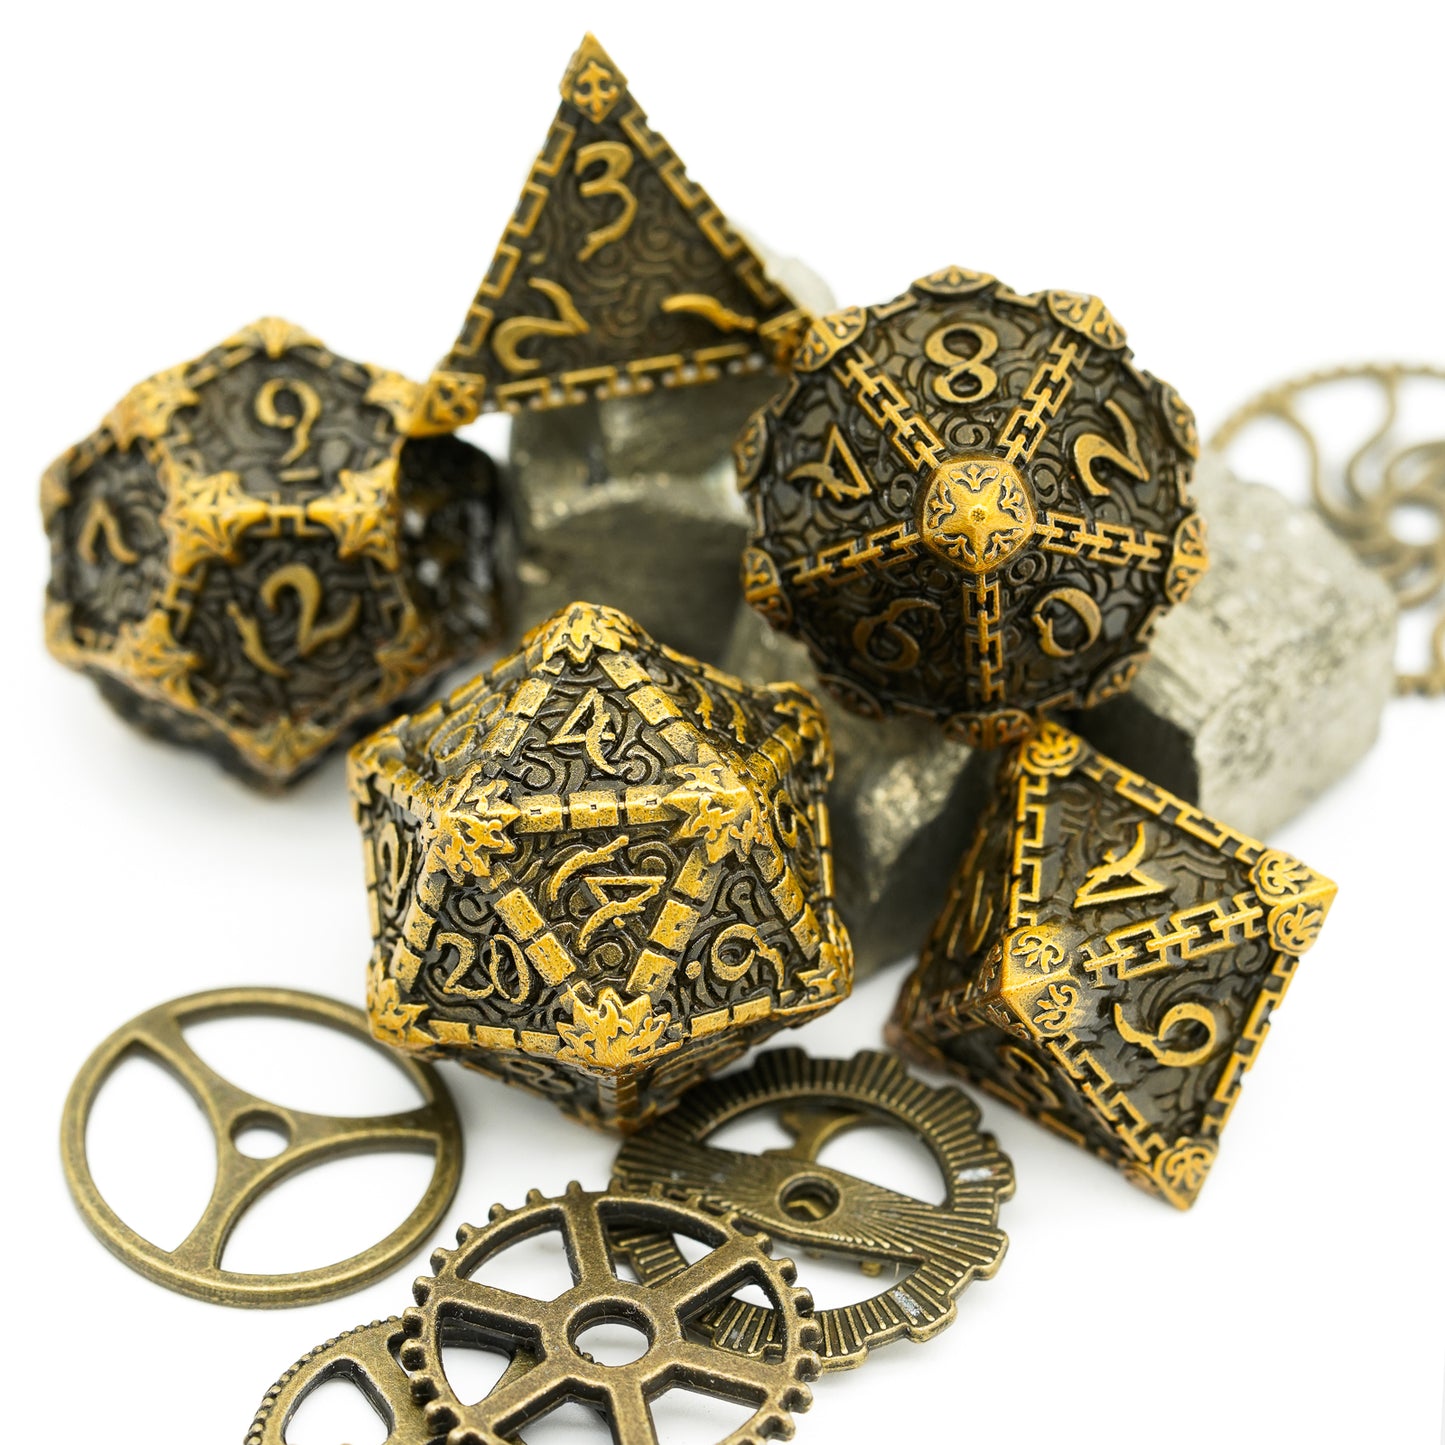 5 gold metal dagger dice with gears and rocks in background